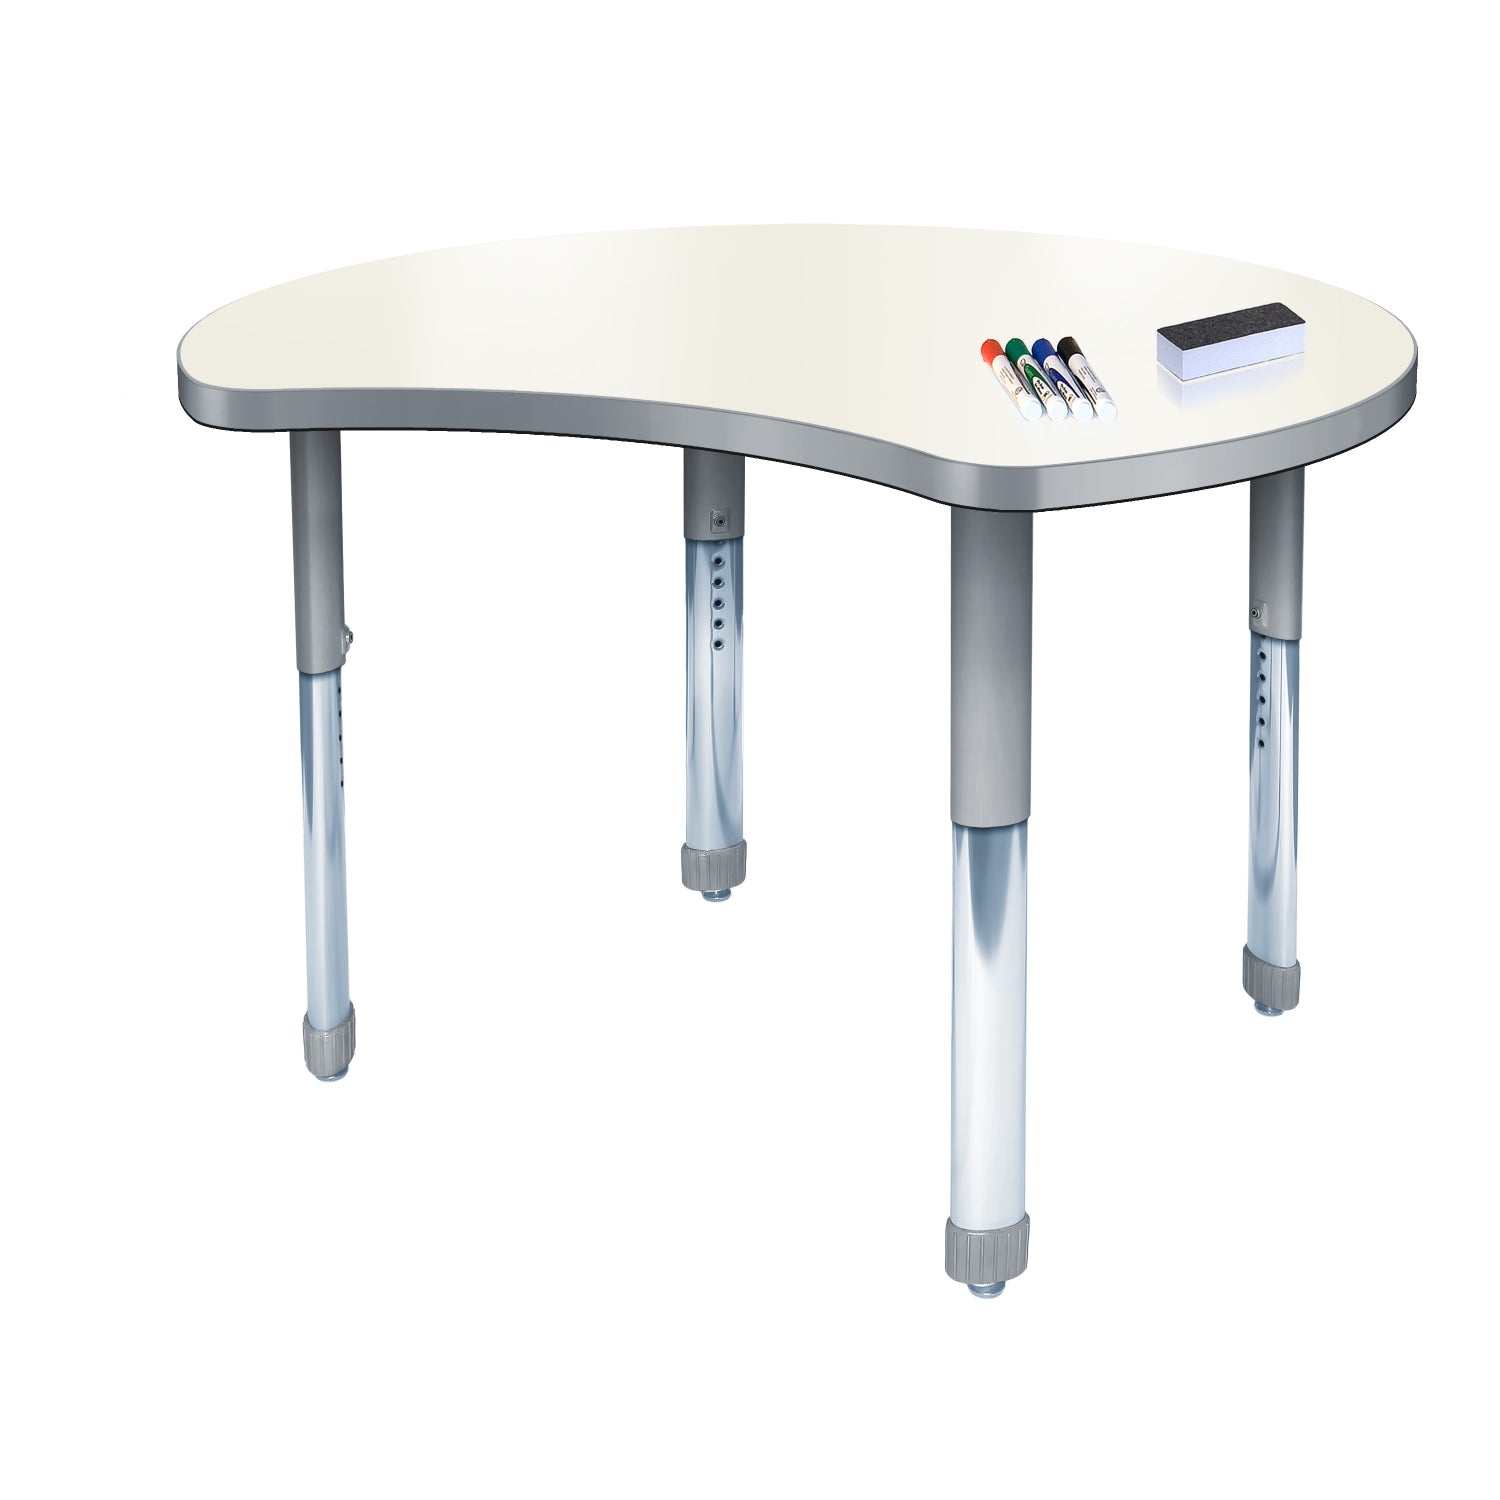 Aero Dry Erase Markerboard Activity Table, 48" Chip, Oval Adjustable Height Legs